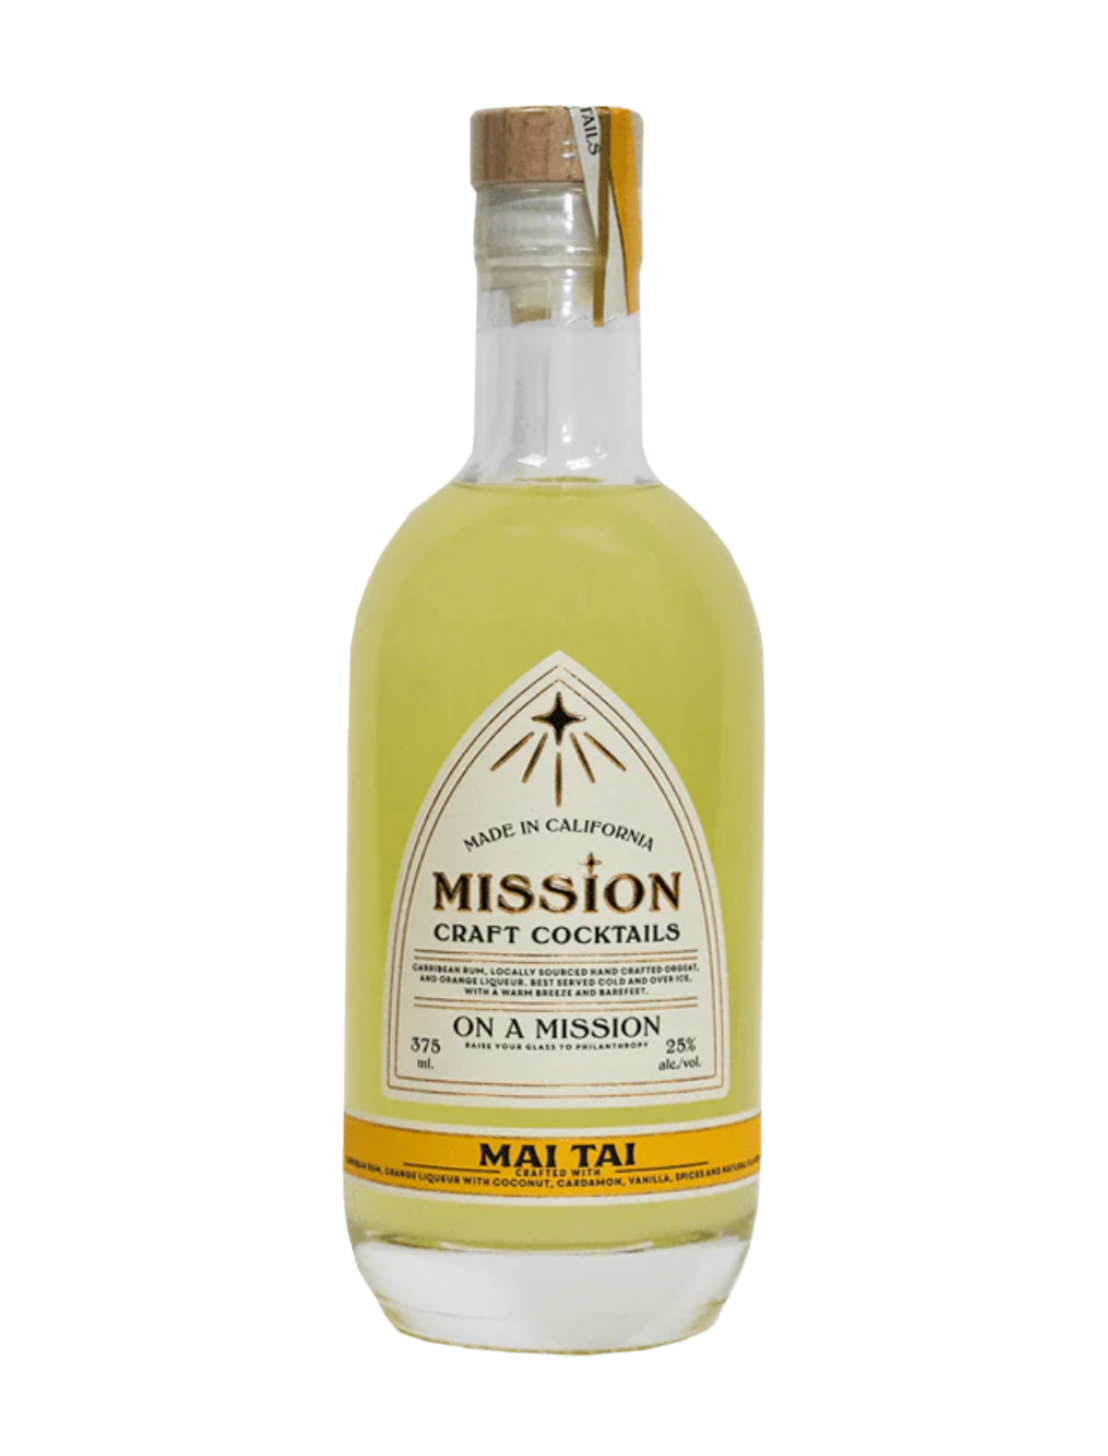 A bottle of Mission Craft Cocktails Mai Tai in front of a plain white background